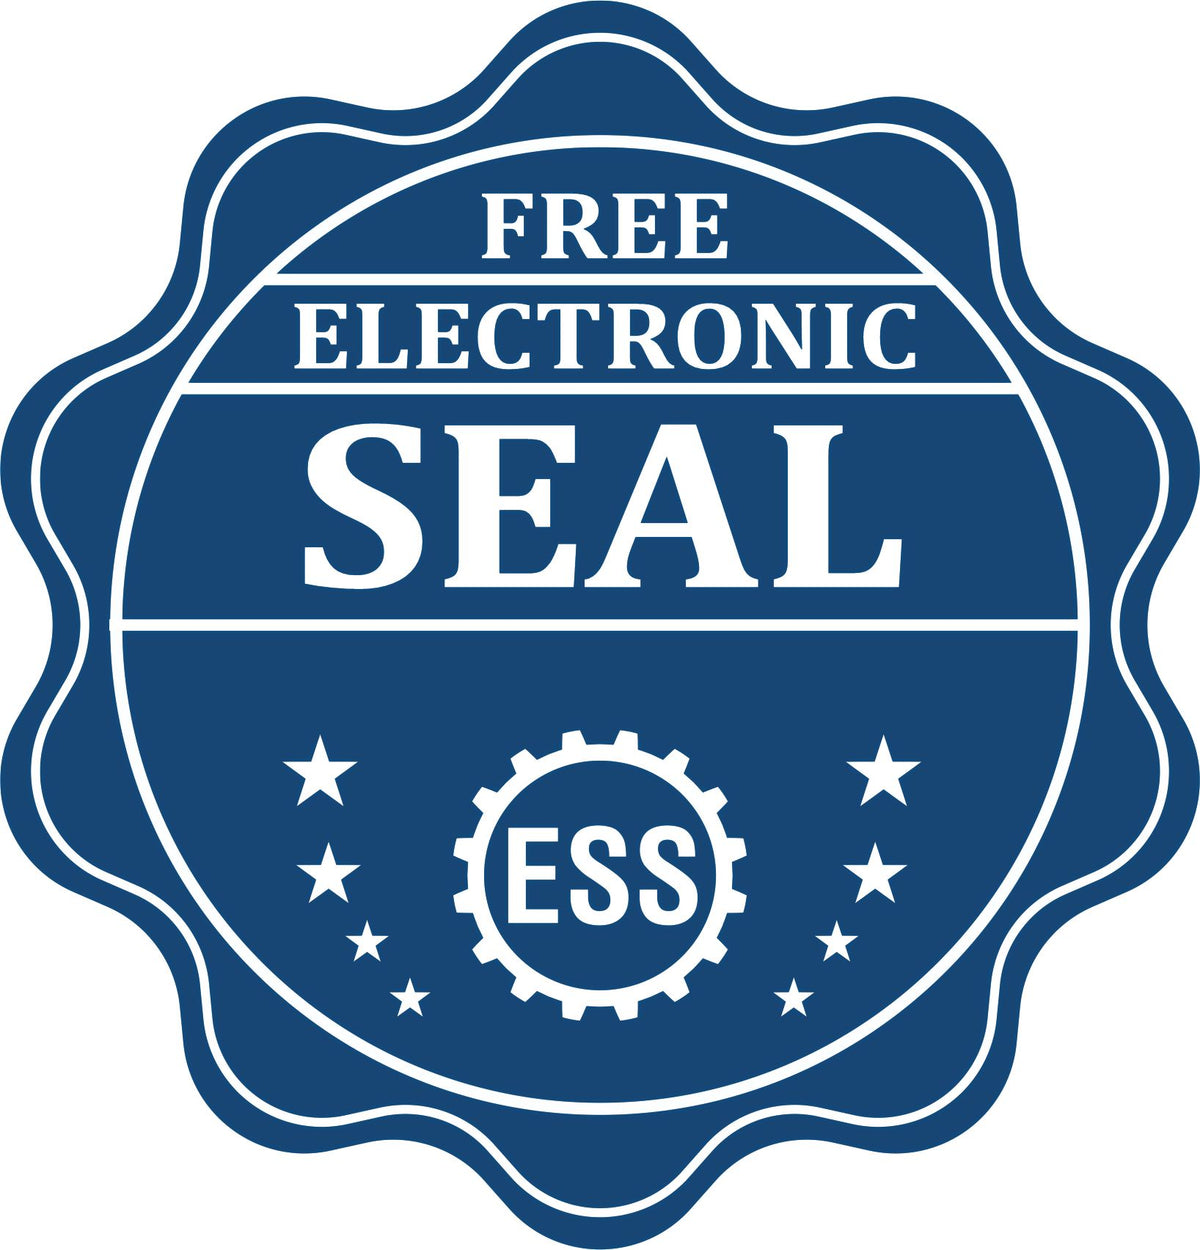 A badge showing a free electronic seal for the Long Reach Wyoming Geology Seal with stars and the ESS gear on the emblem.